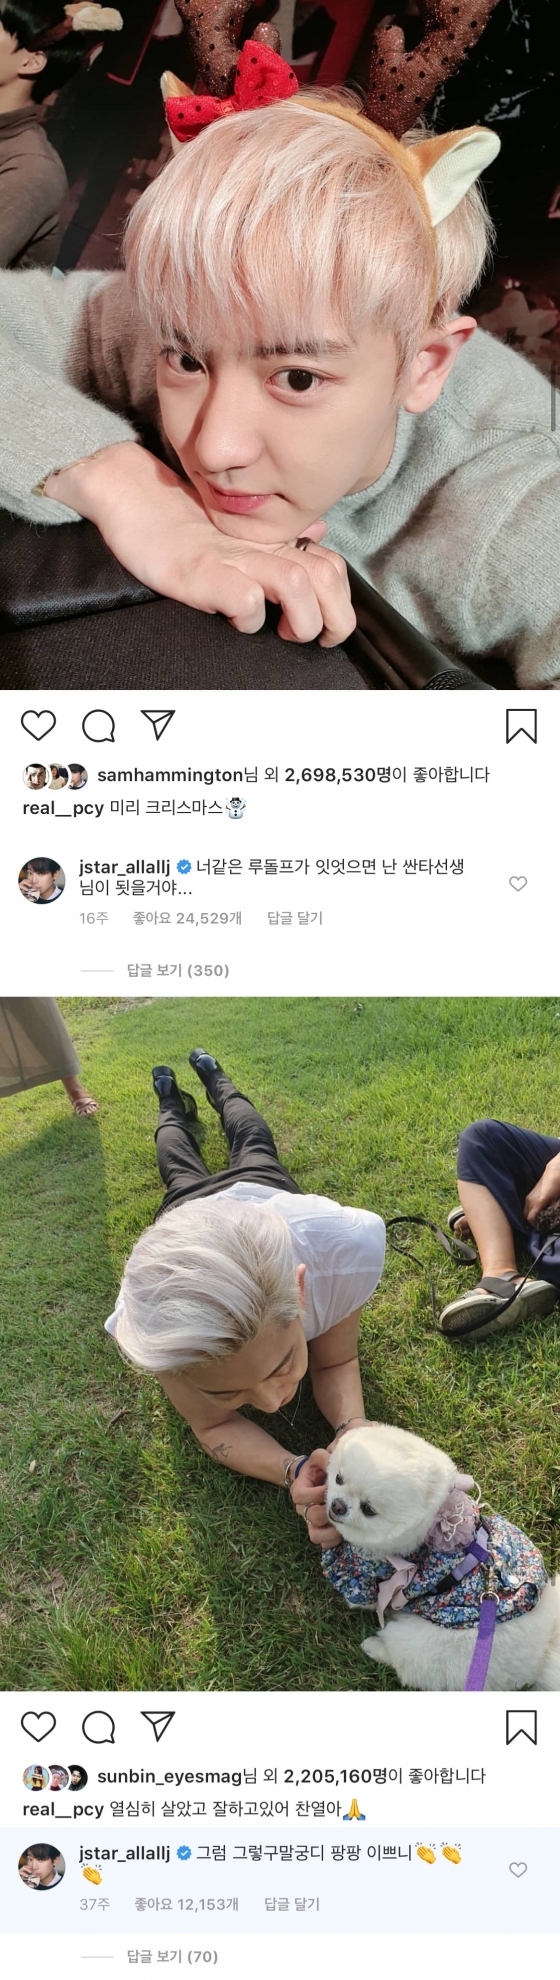 Actor Jung Kyung-ho showed his love for EXO member Chanyeol and showed off his contacting aspect.Jung Kyung-ho attracted fans attention by posting a series of replies to the Instagram post posted by Chanyeol.When Chanyeol posted a picture of the past with the article Did you know this time on the 8th, Jung Kyung-ho wrote a faint reply saying I knew.Also, when Chanyeol posted a playful post with a picture of Haduri and Who will be Down, Jung Kyung-ho poured out his affection for Chanyeol, saying, The video is misuse.Jung Kyung-hos love of Chanyeol didnt end here.When Chanyeol wore Rudolphs headband for Christmas, he laughed with an extraordinary expression, If I had Rudolph like you, I would have become a Santa teacher.Chanyeol said, I lived hard and I am doing well, Chanyeol. Jung Kyung-ho said, Well, then, I am very happy.It is widely known that Jung Kyung-ho is a fan of Chanyeol among EXO fans.Jung Kyung-ho expressed his fanship without hesitation, leaving a comment that was consistently affectionate to Chanyeols Instagram.Meanwhile, Jung Kyung-ho and Chanyeol have appeared together in the MBC drama Missing Nine, which ended in 2017.